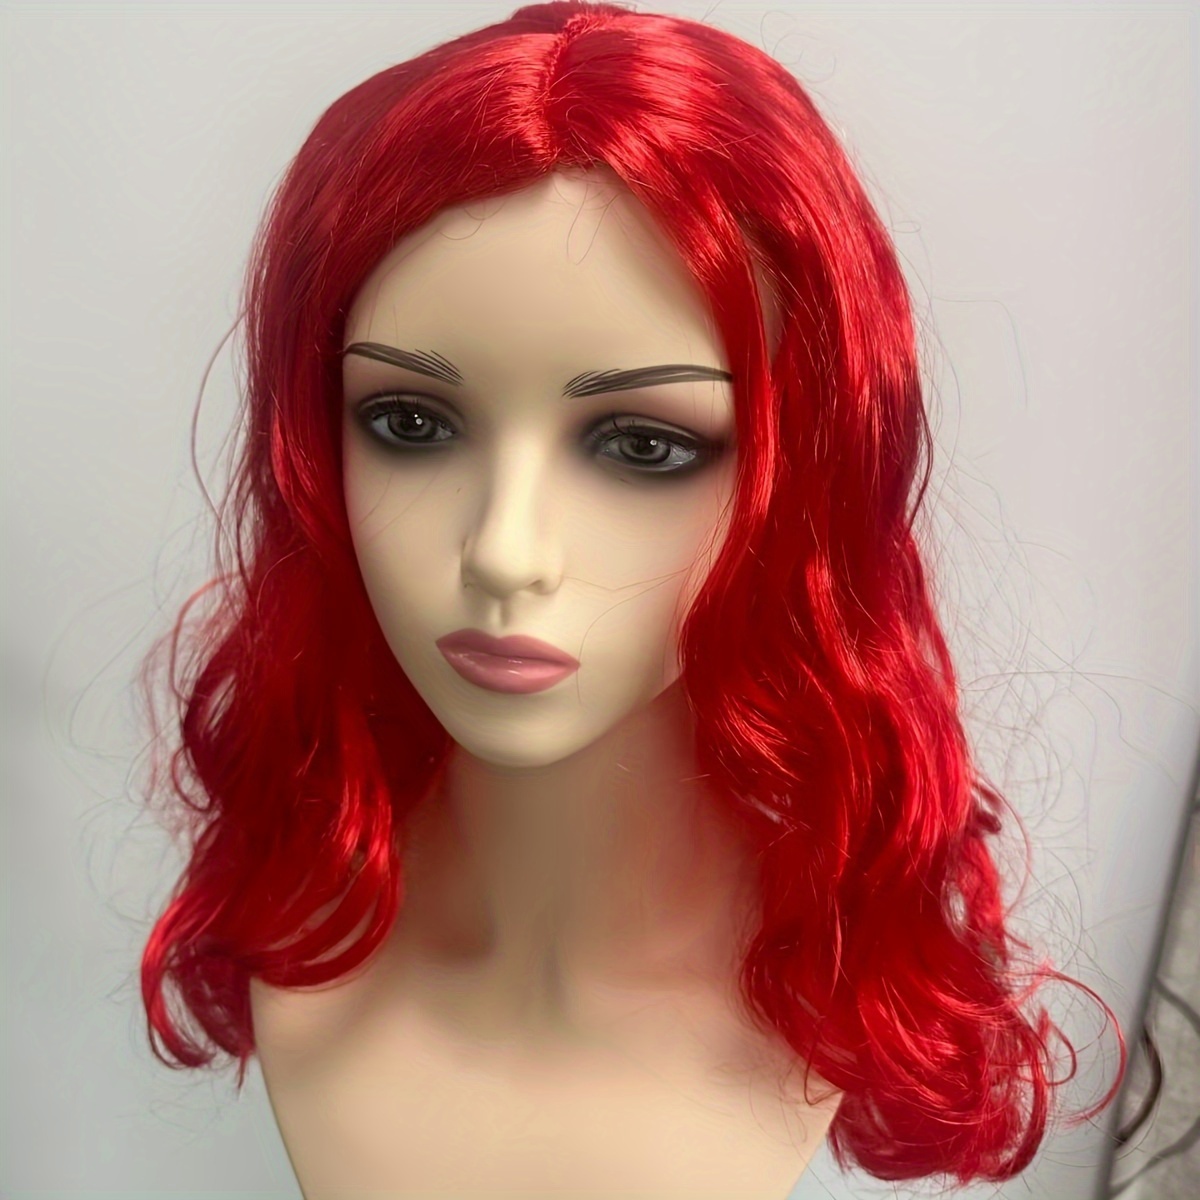 

1pc Girl's Cute Party Anime Wig, Spandex Wavy Decorative Long Hair Wig